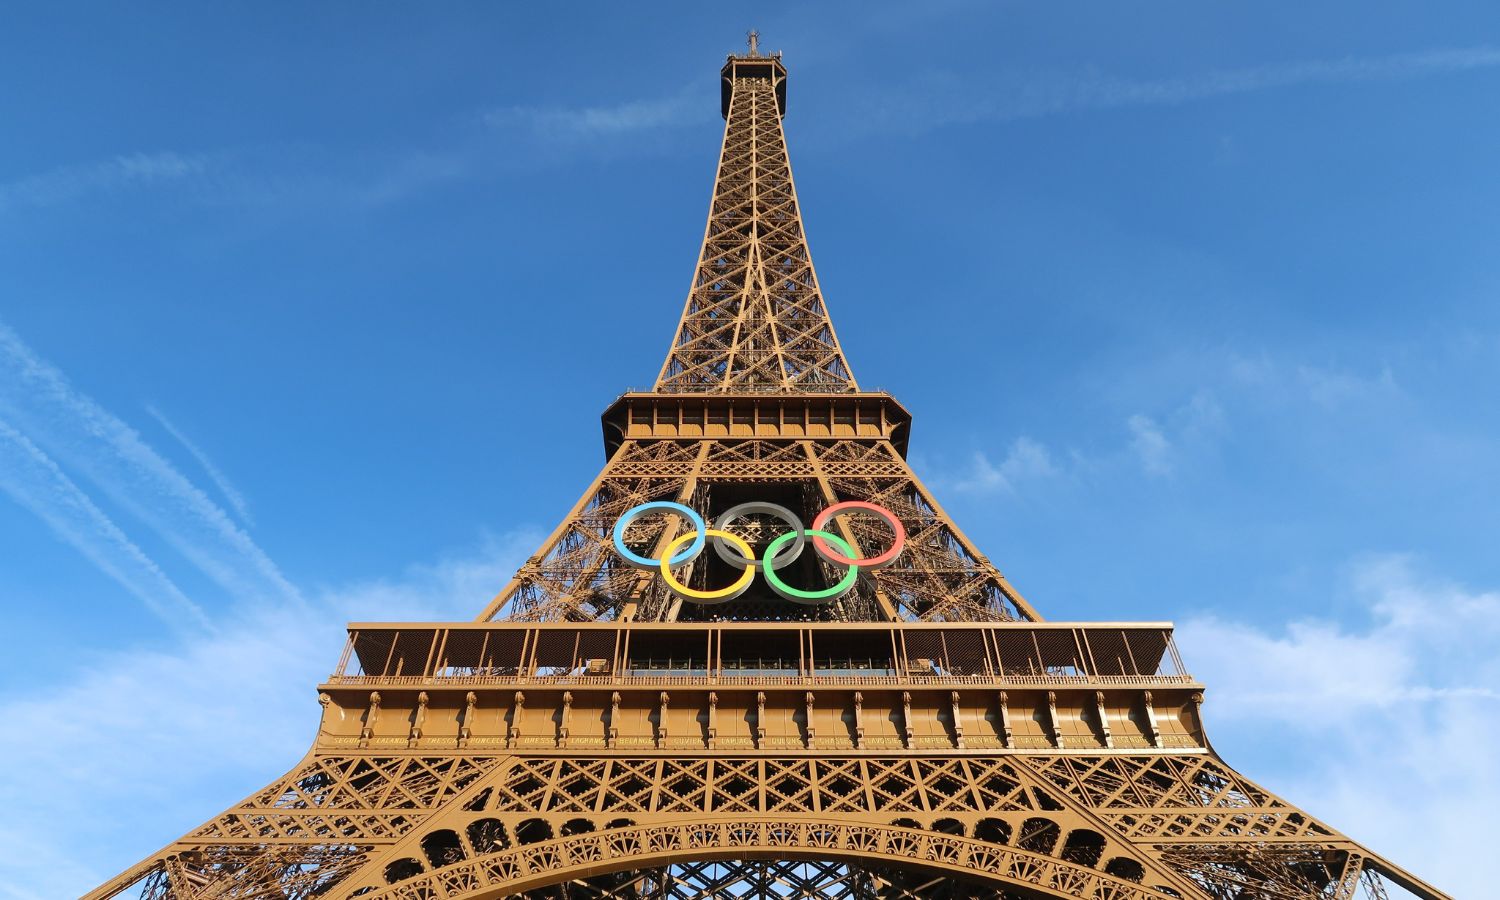 78 Indian athletes to take part in Paris Olympics opening ceremony